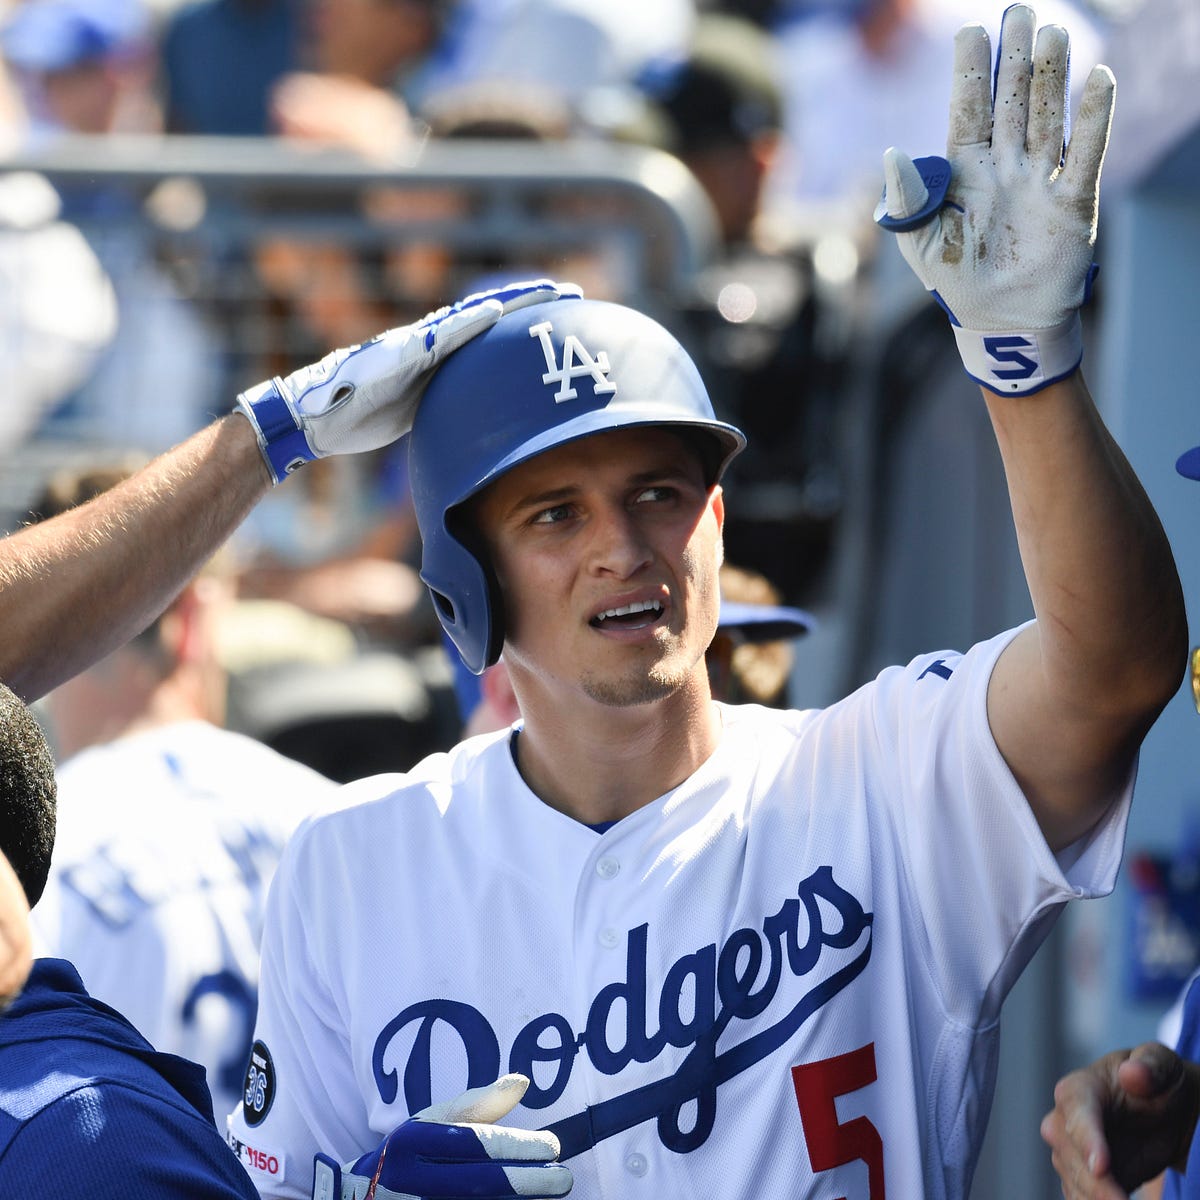 For Corey Seager, it was a day like most in his career